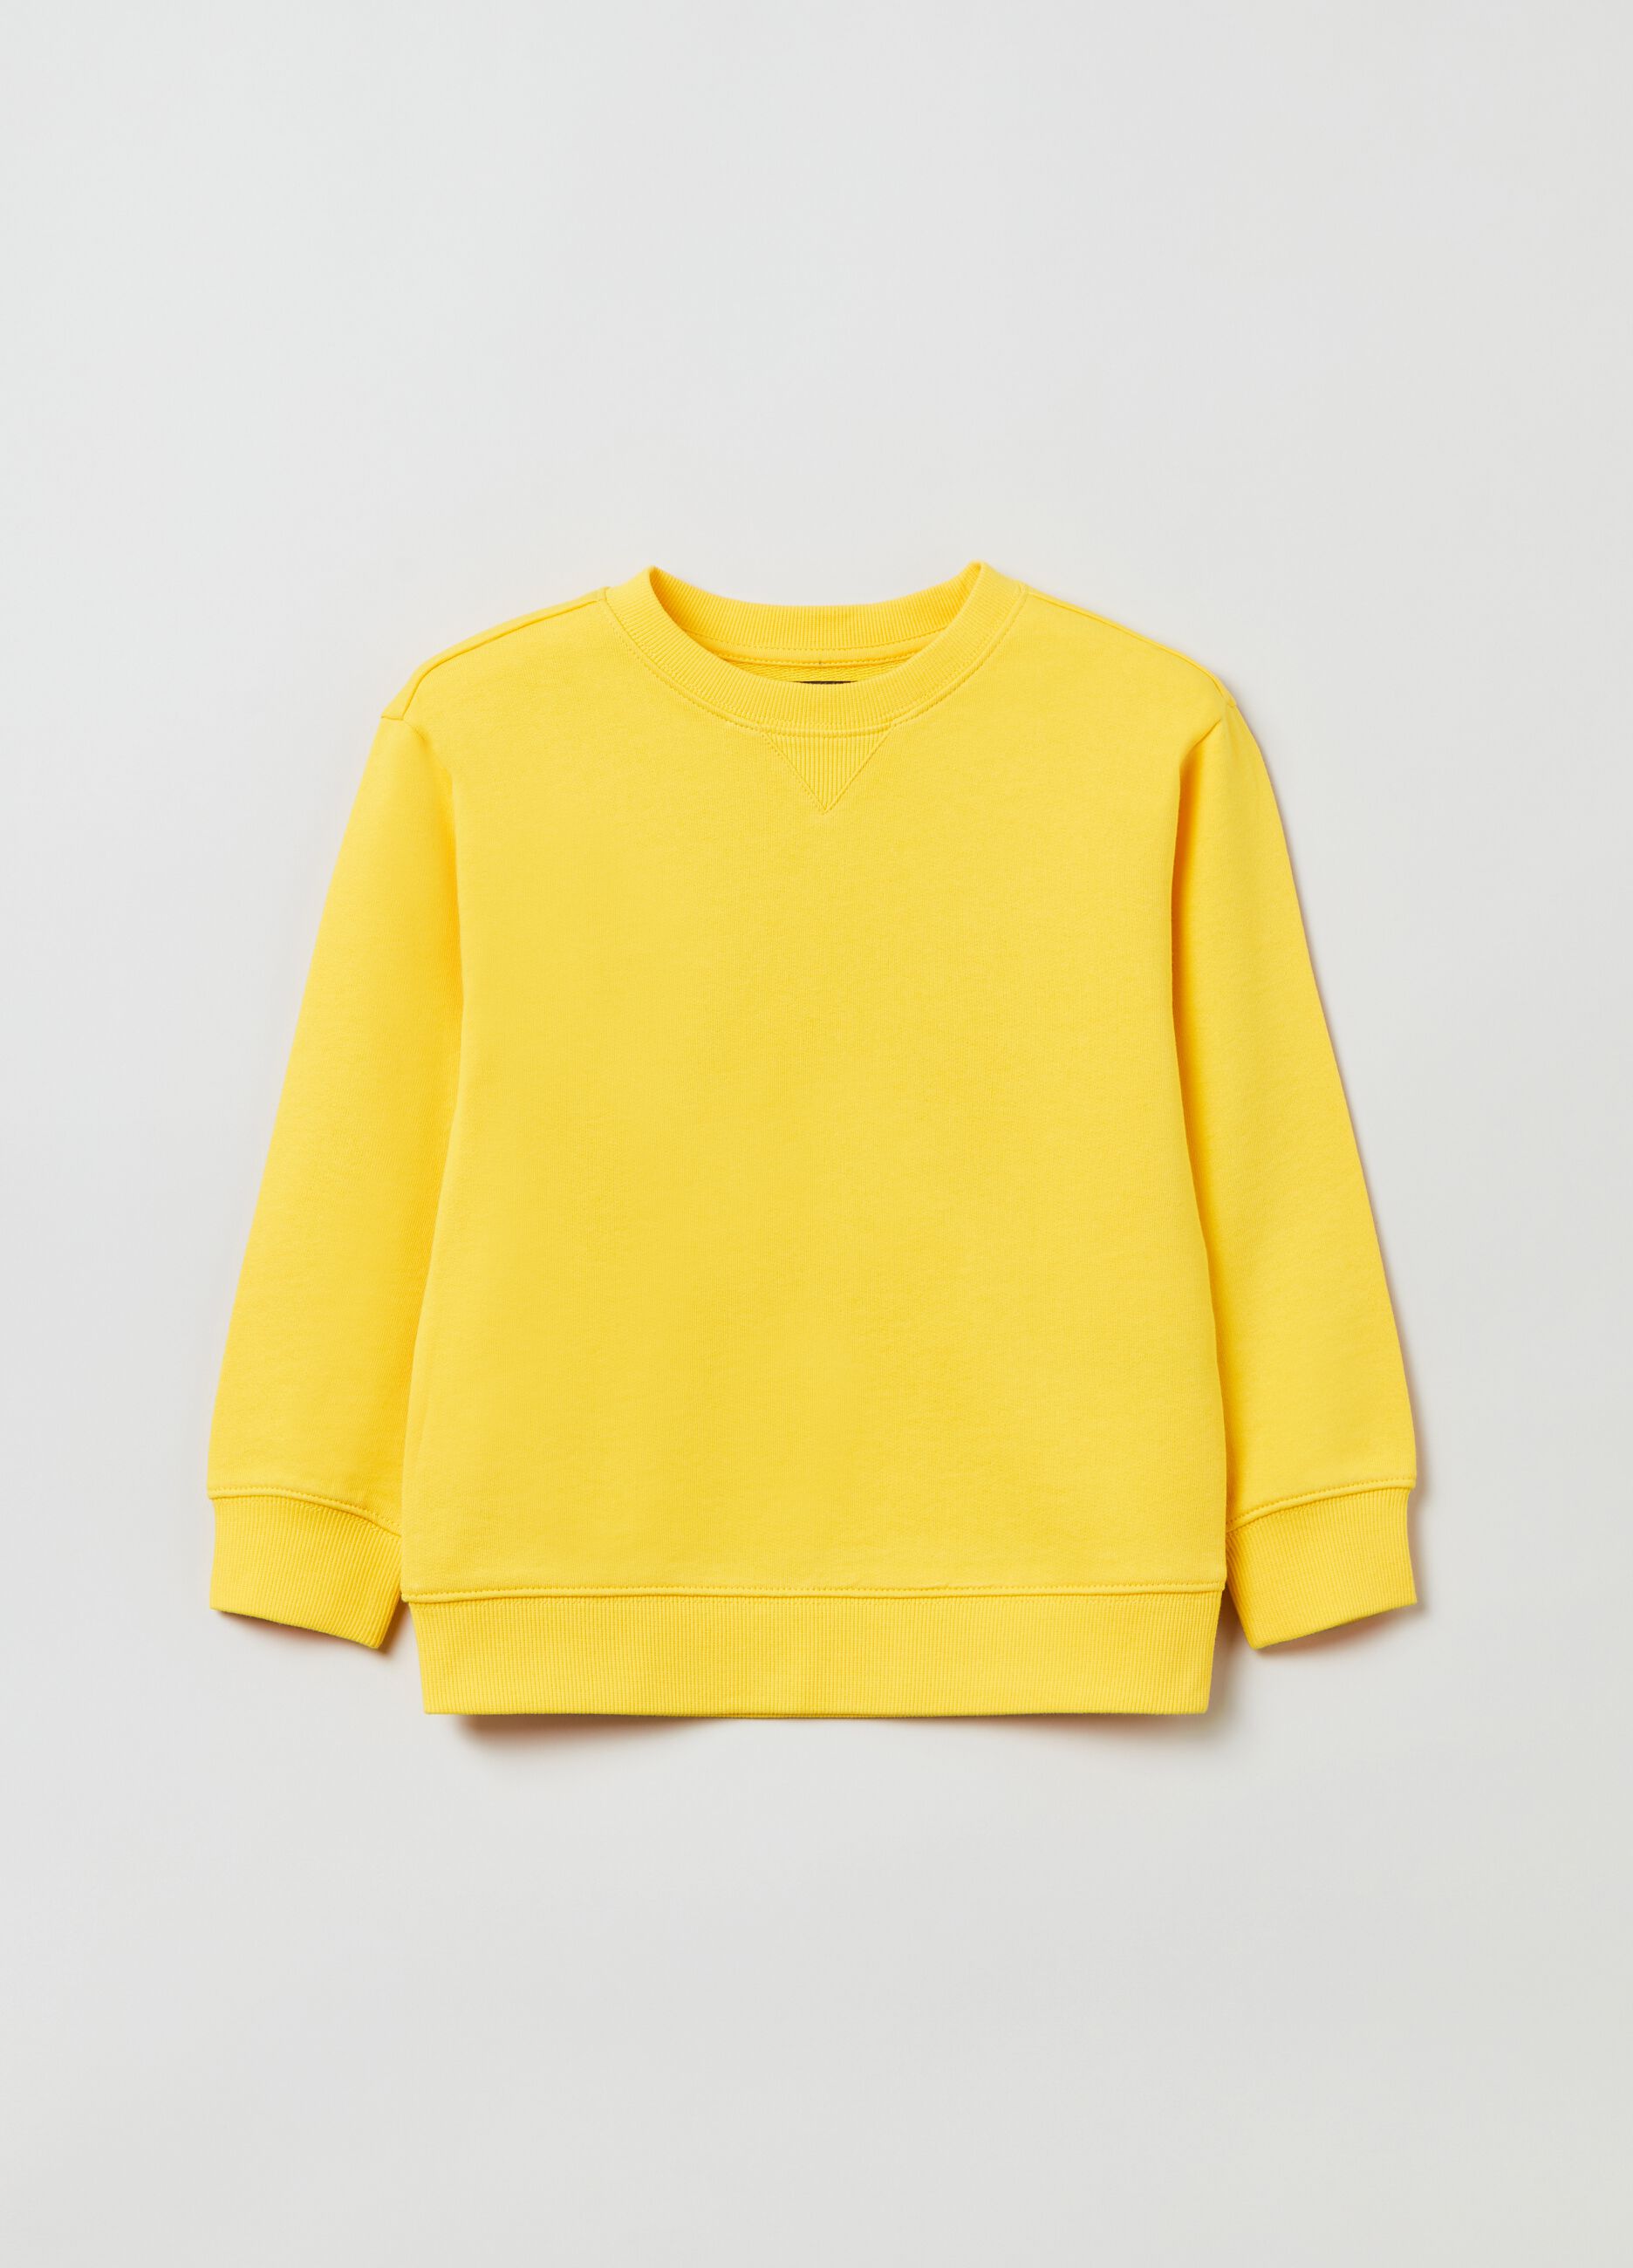 Sweatshirt in French Terry with round neck